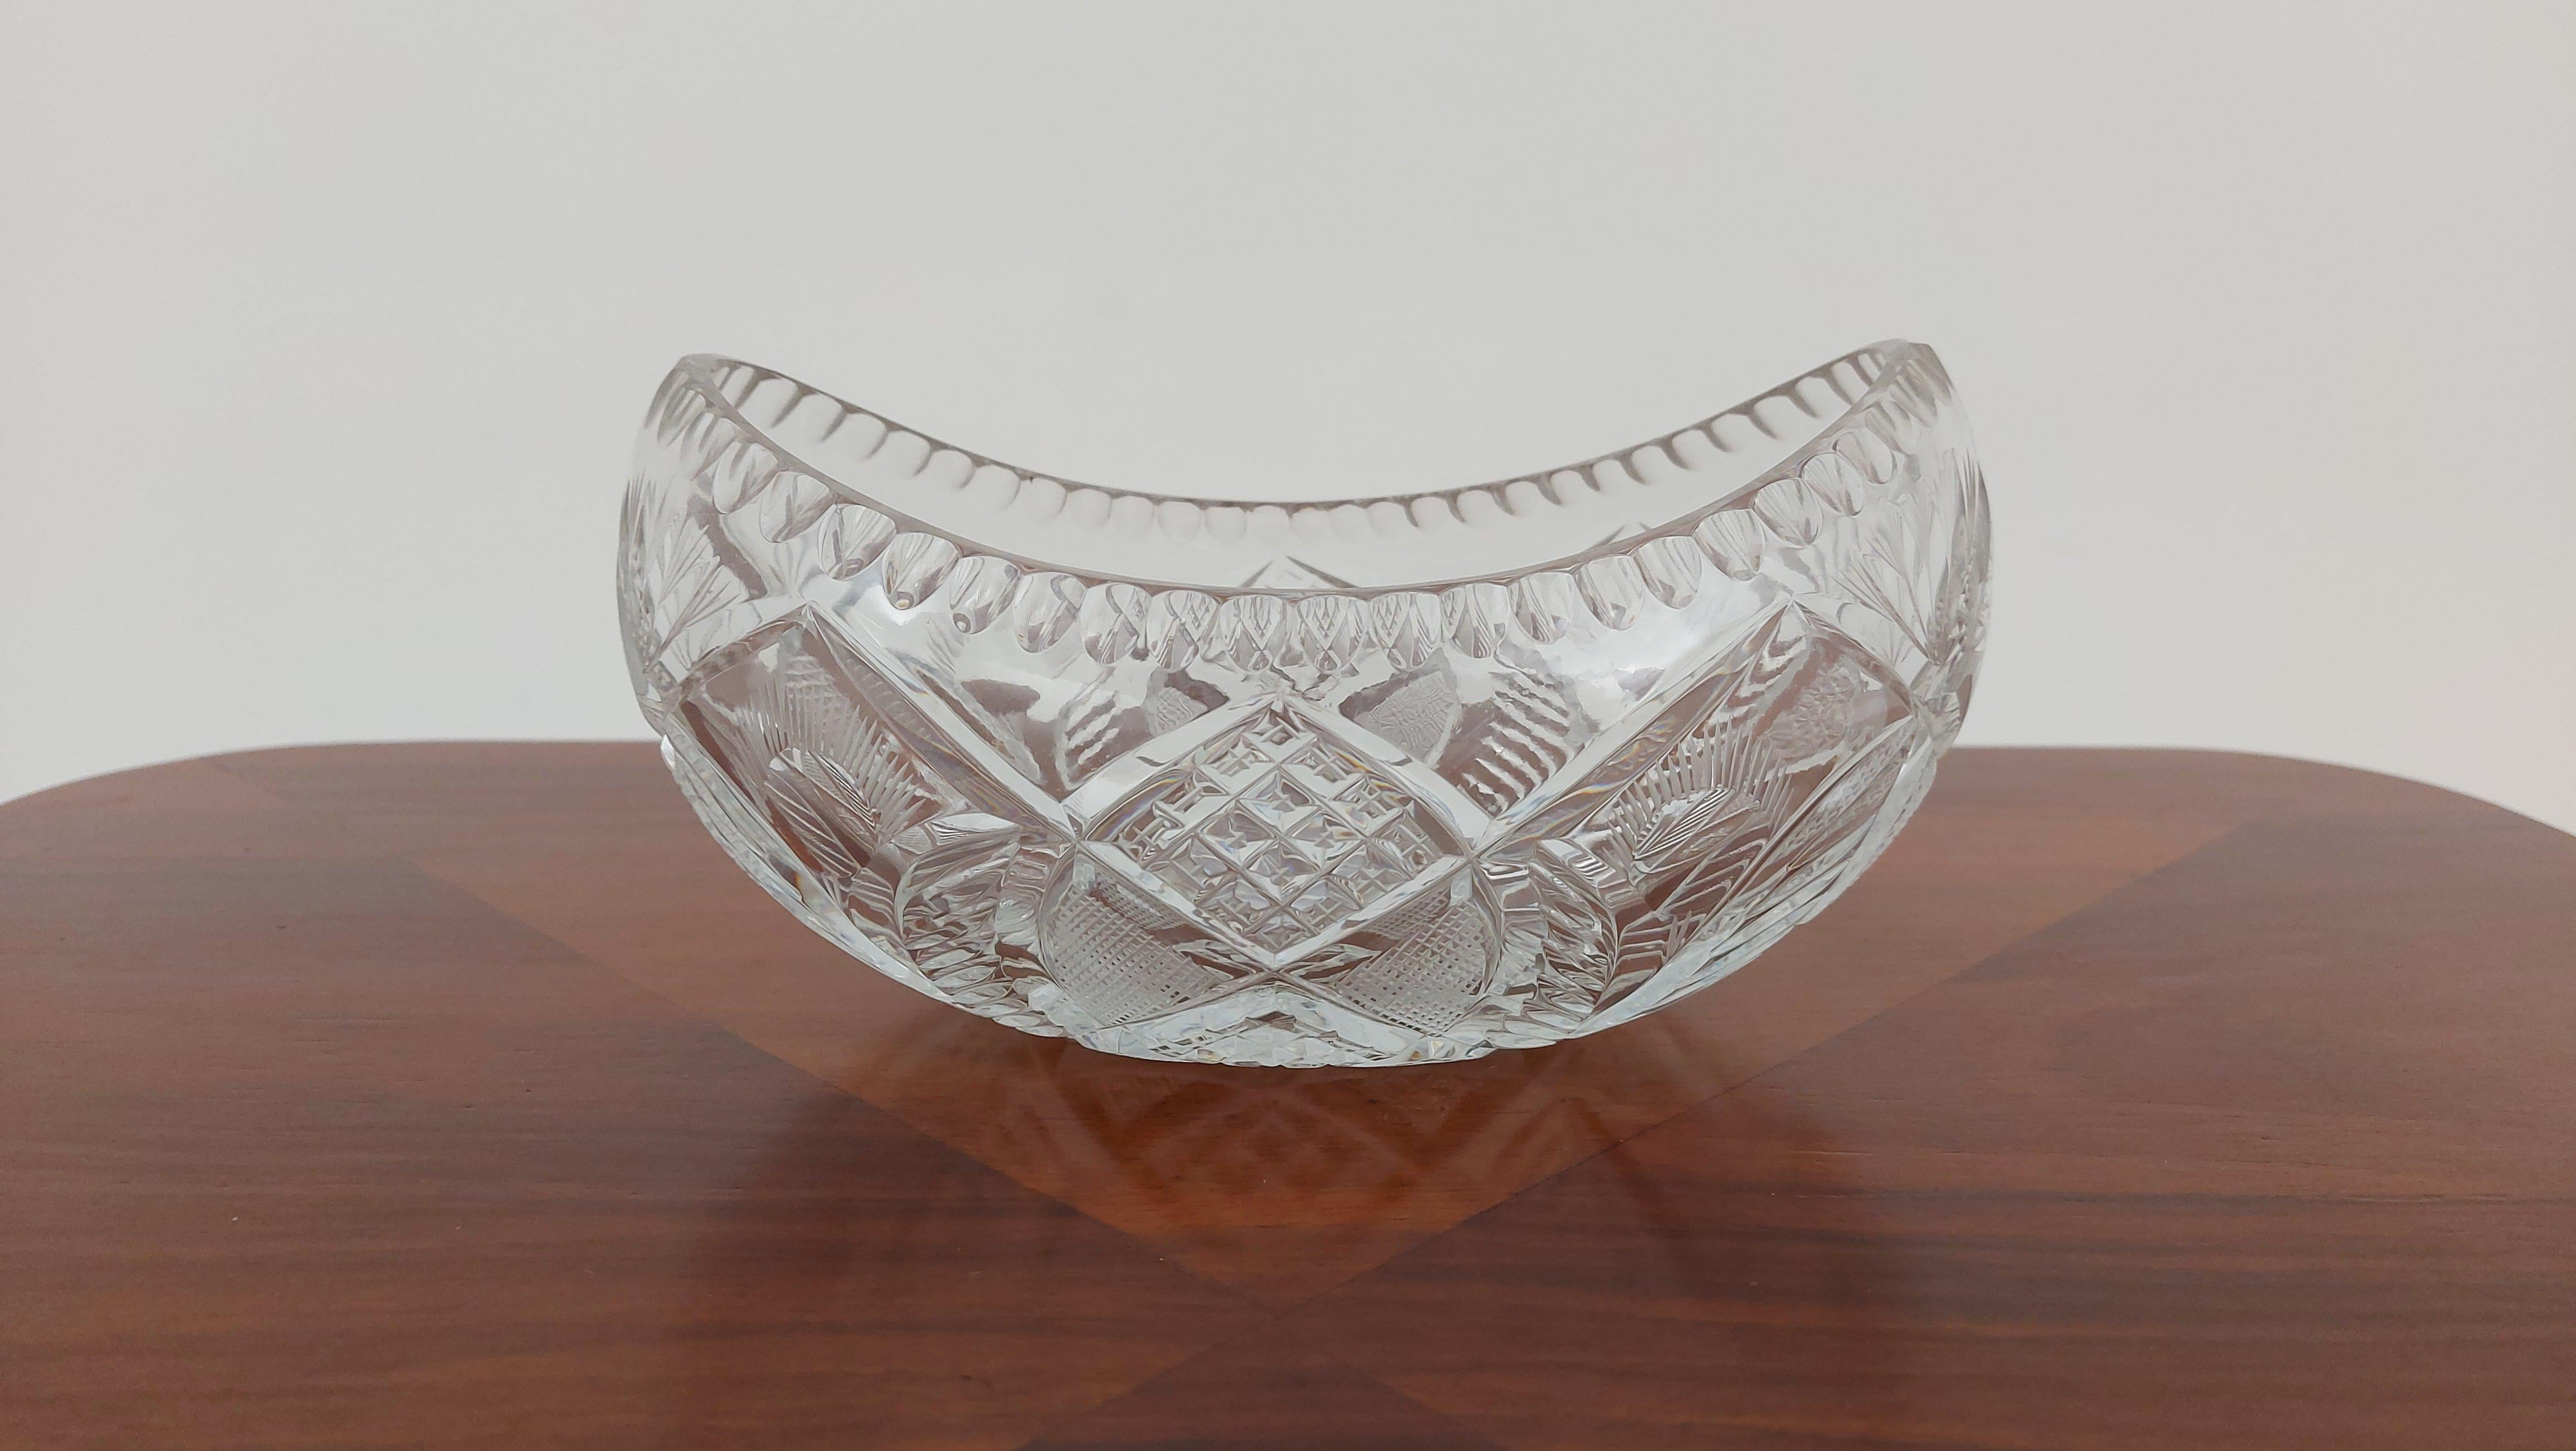 Crystal bowl for fruit or sweets.

Made in Poland in the 1950s / 1960s.

Very good condition.

Dimensions: height 10cm / width 21cm / depth 12.5cm.